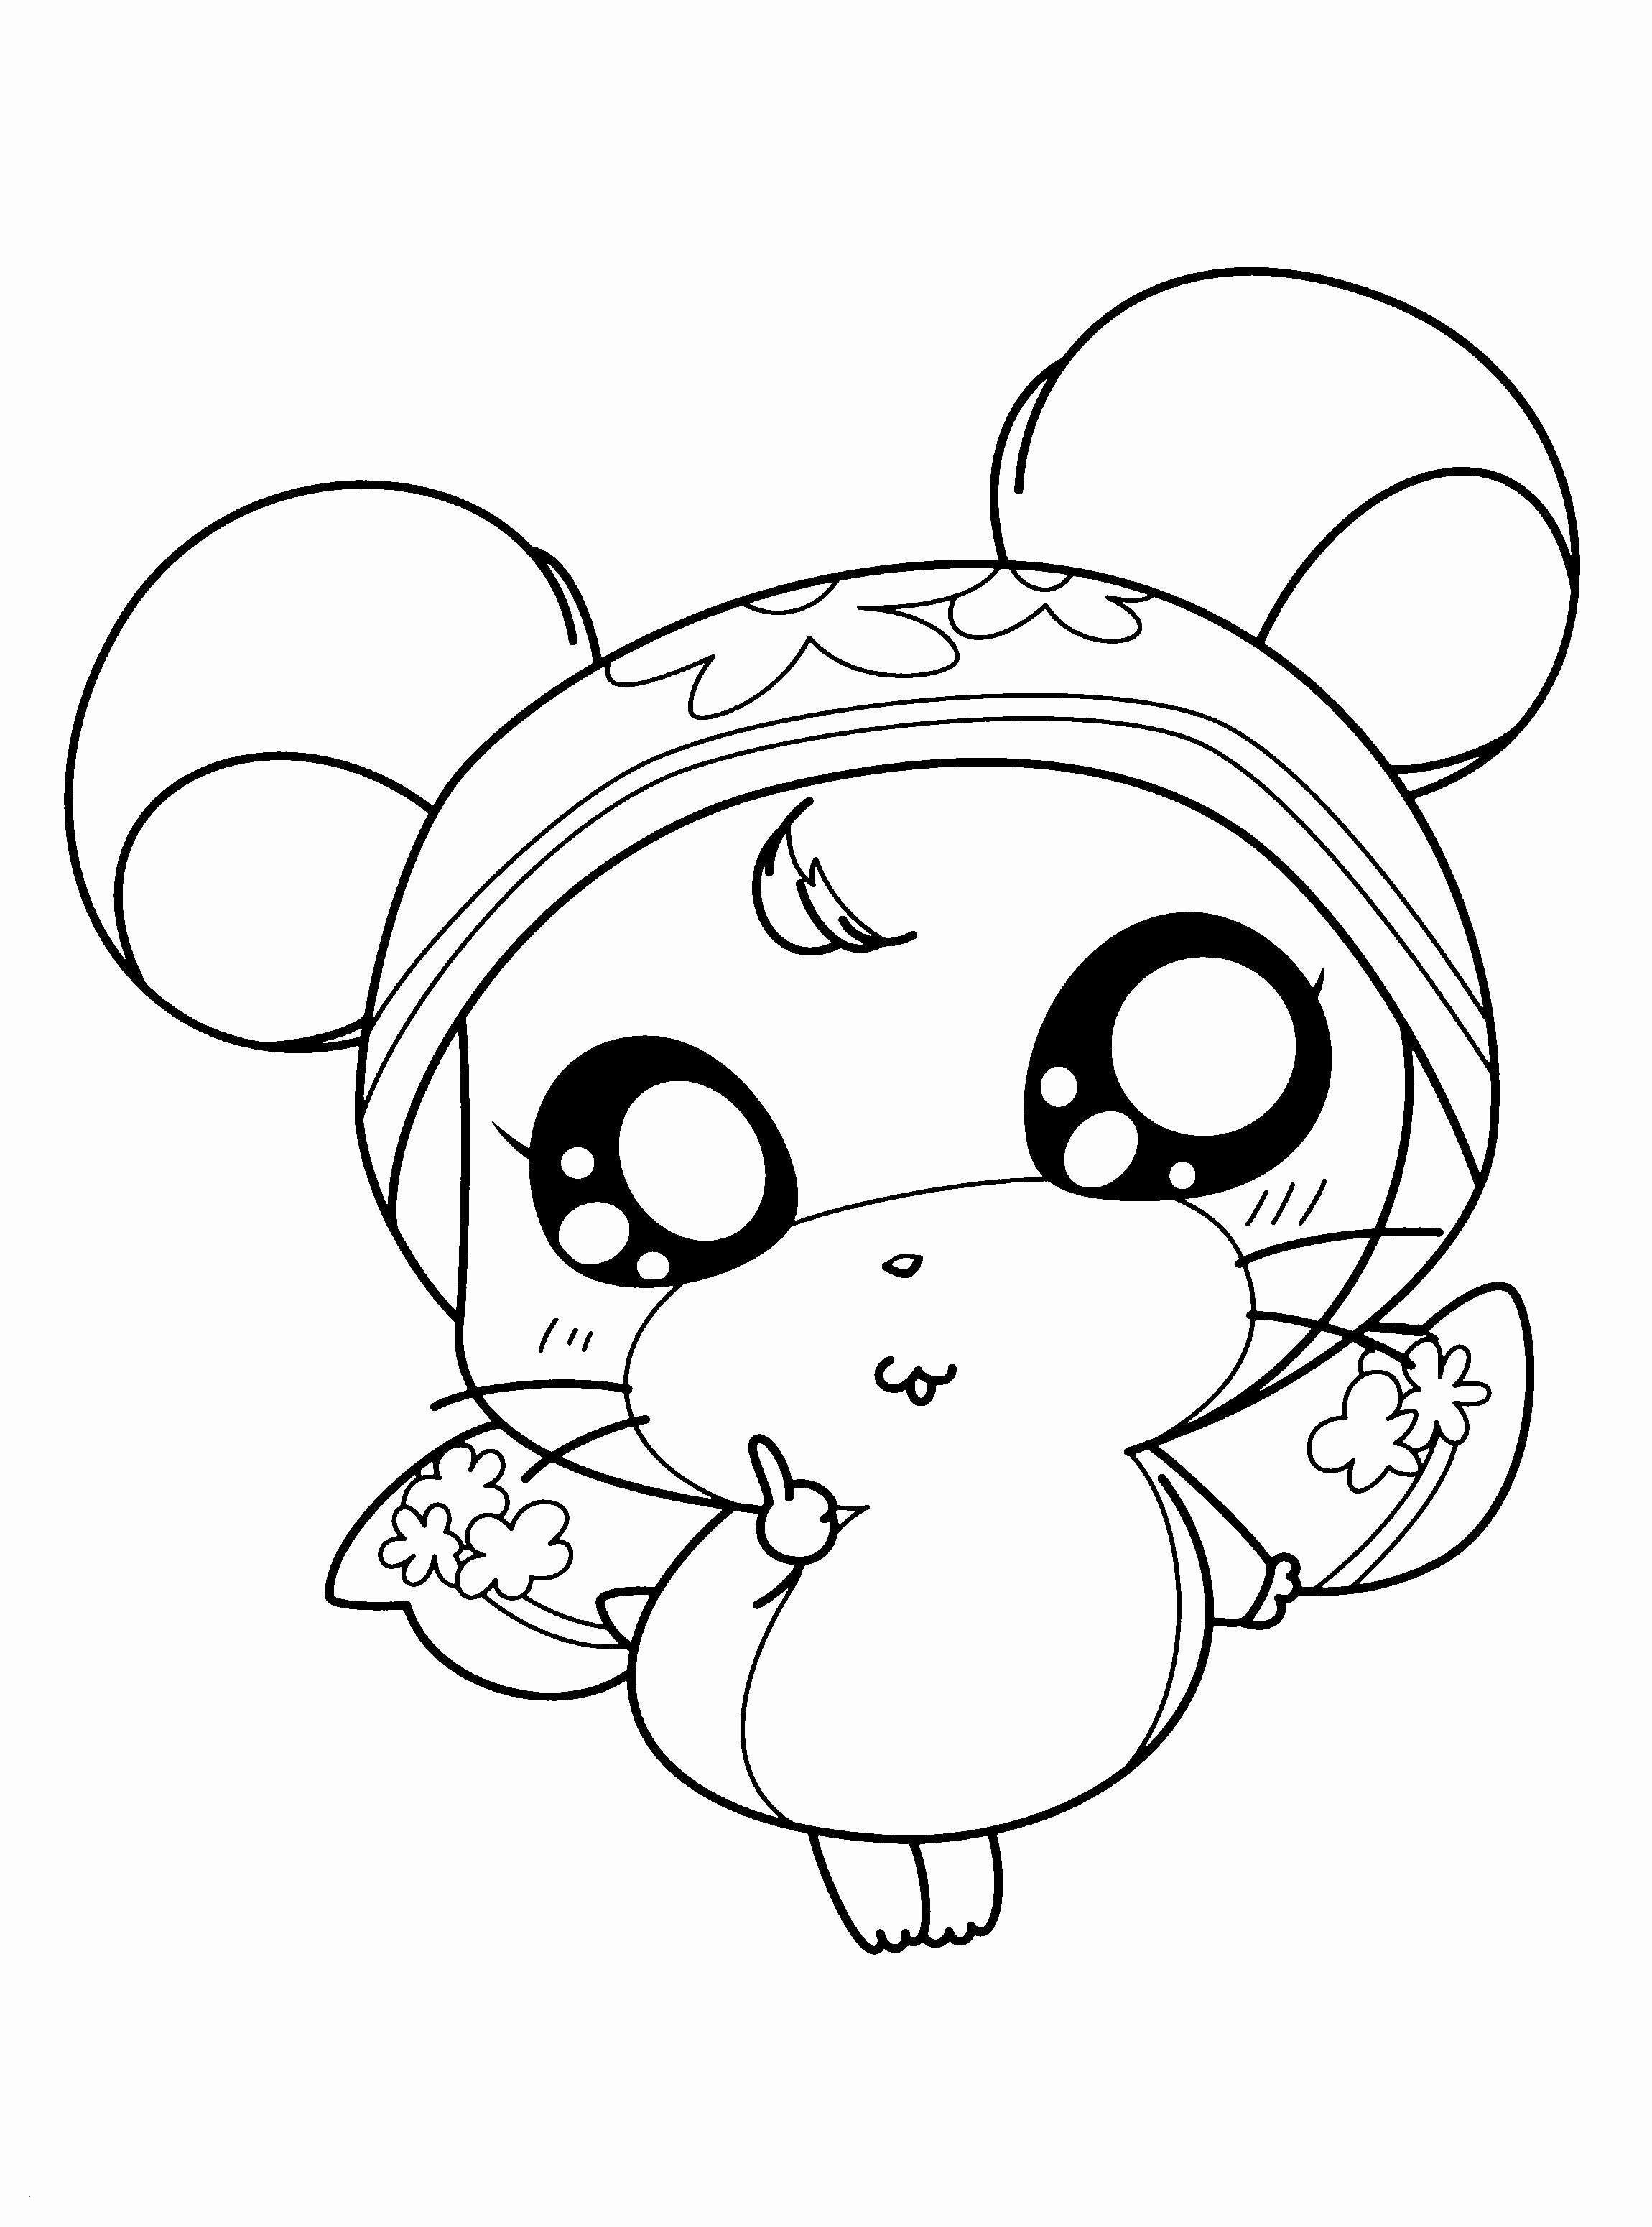 Coloring Panda Lovely Christmas Coloring Pages Elf